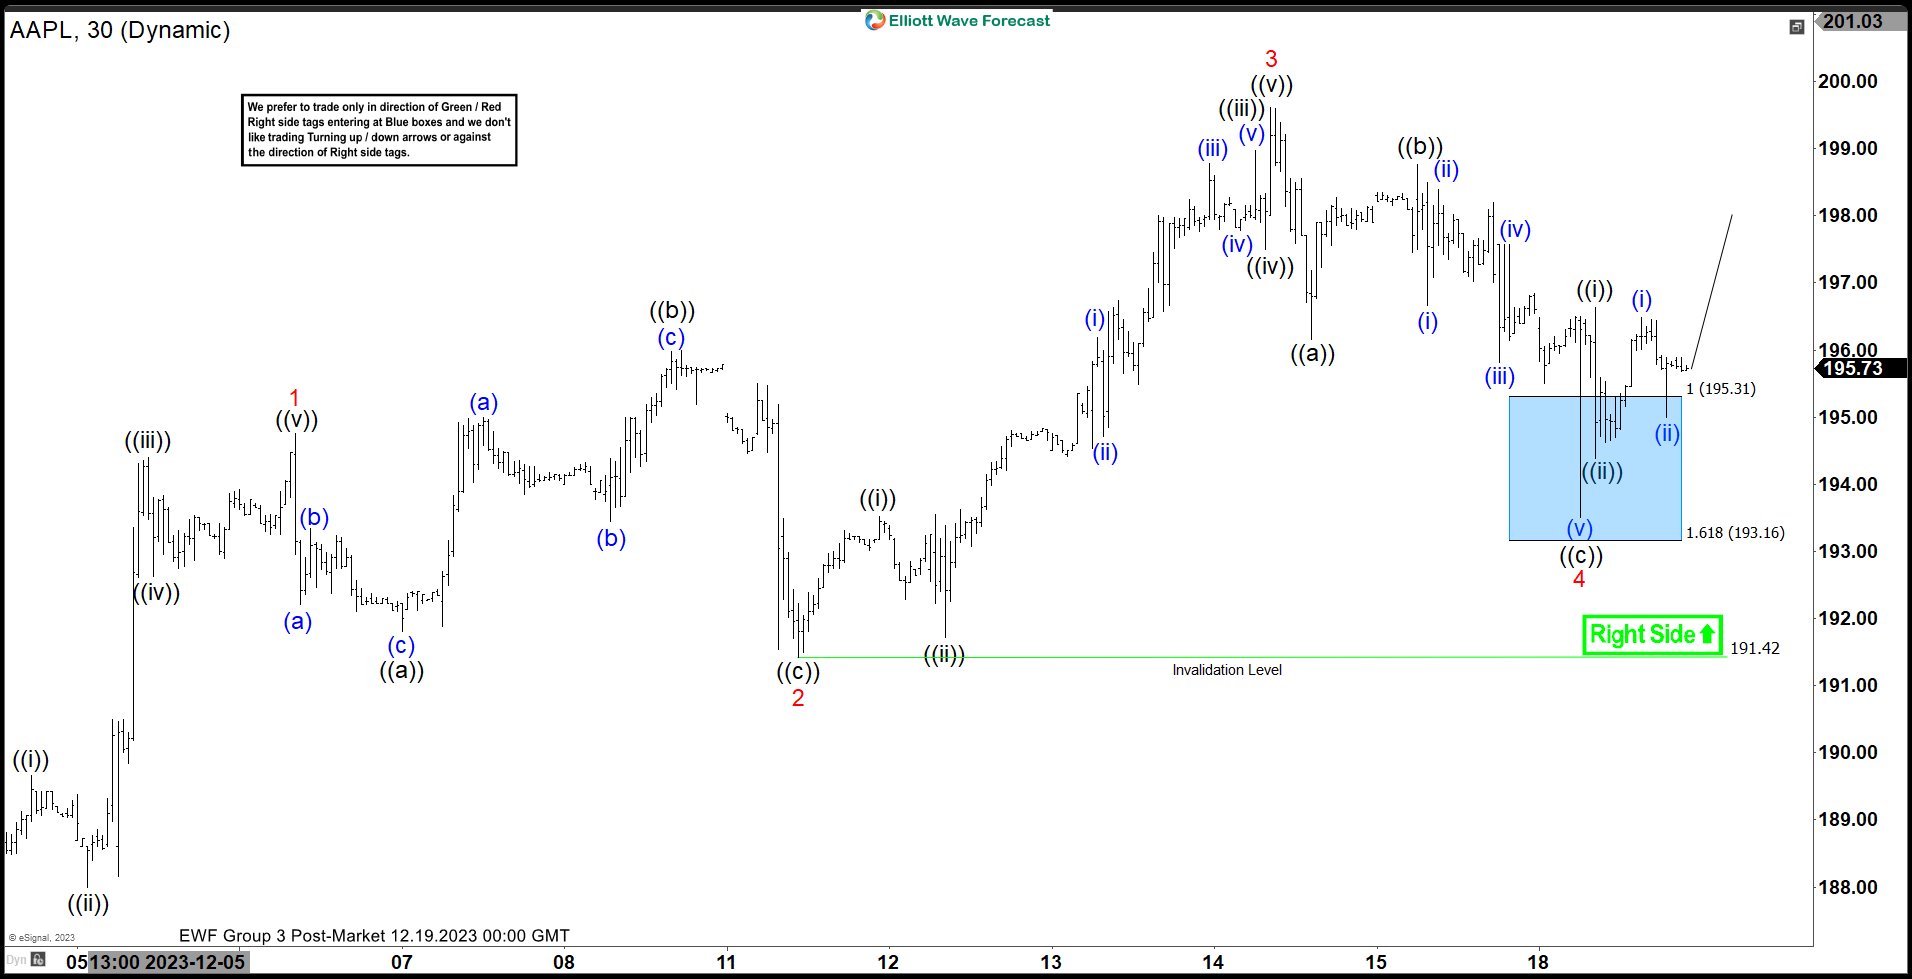 AAPL Keeping The Momentum & Reacting Higher From Blue Box Area